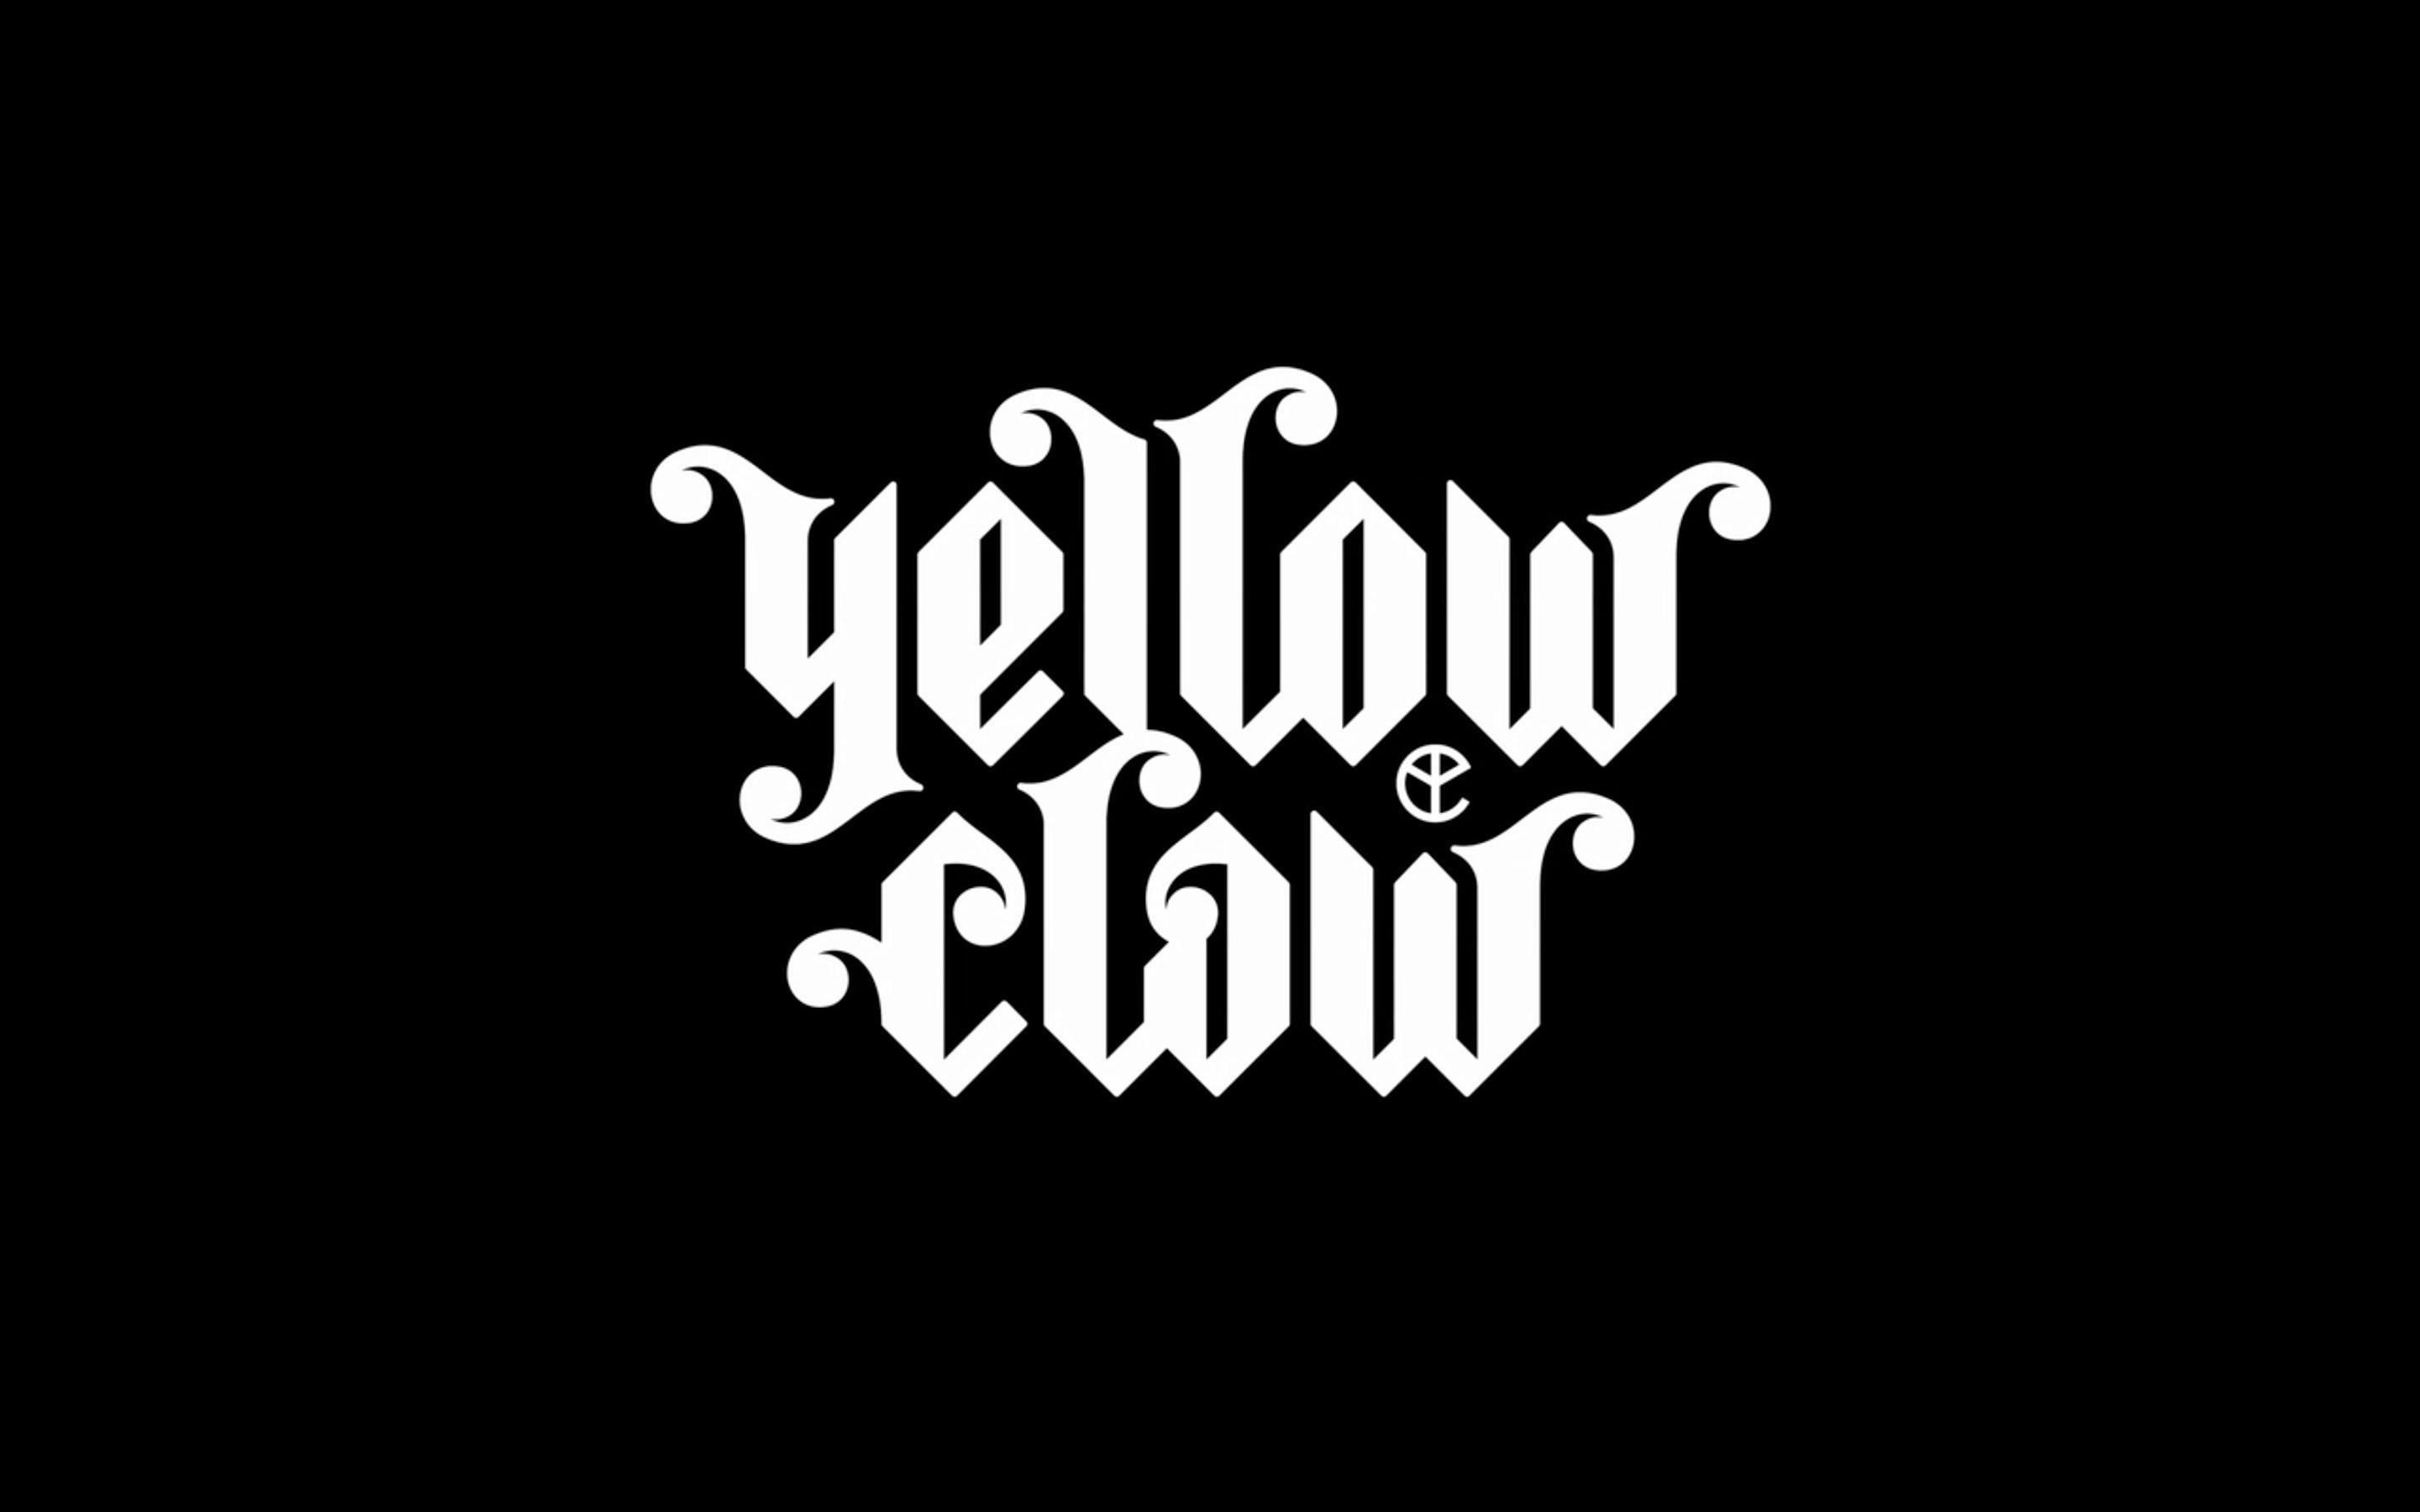 Yellow Claw Wallpaper. Keep Calm